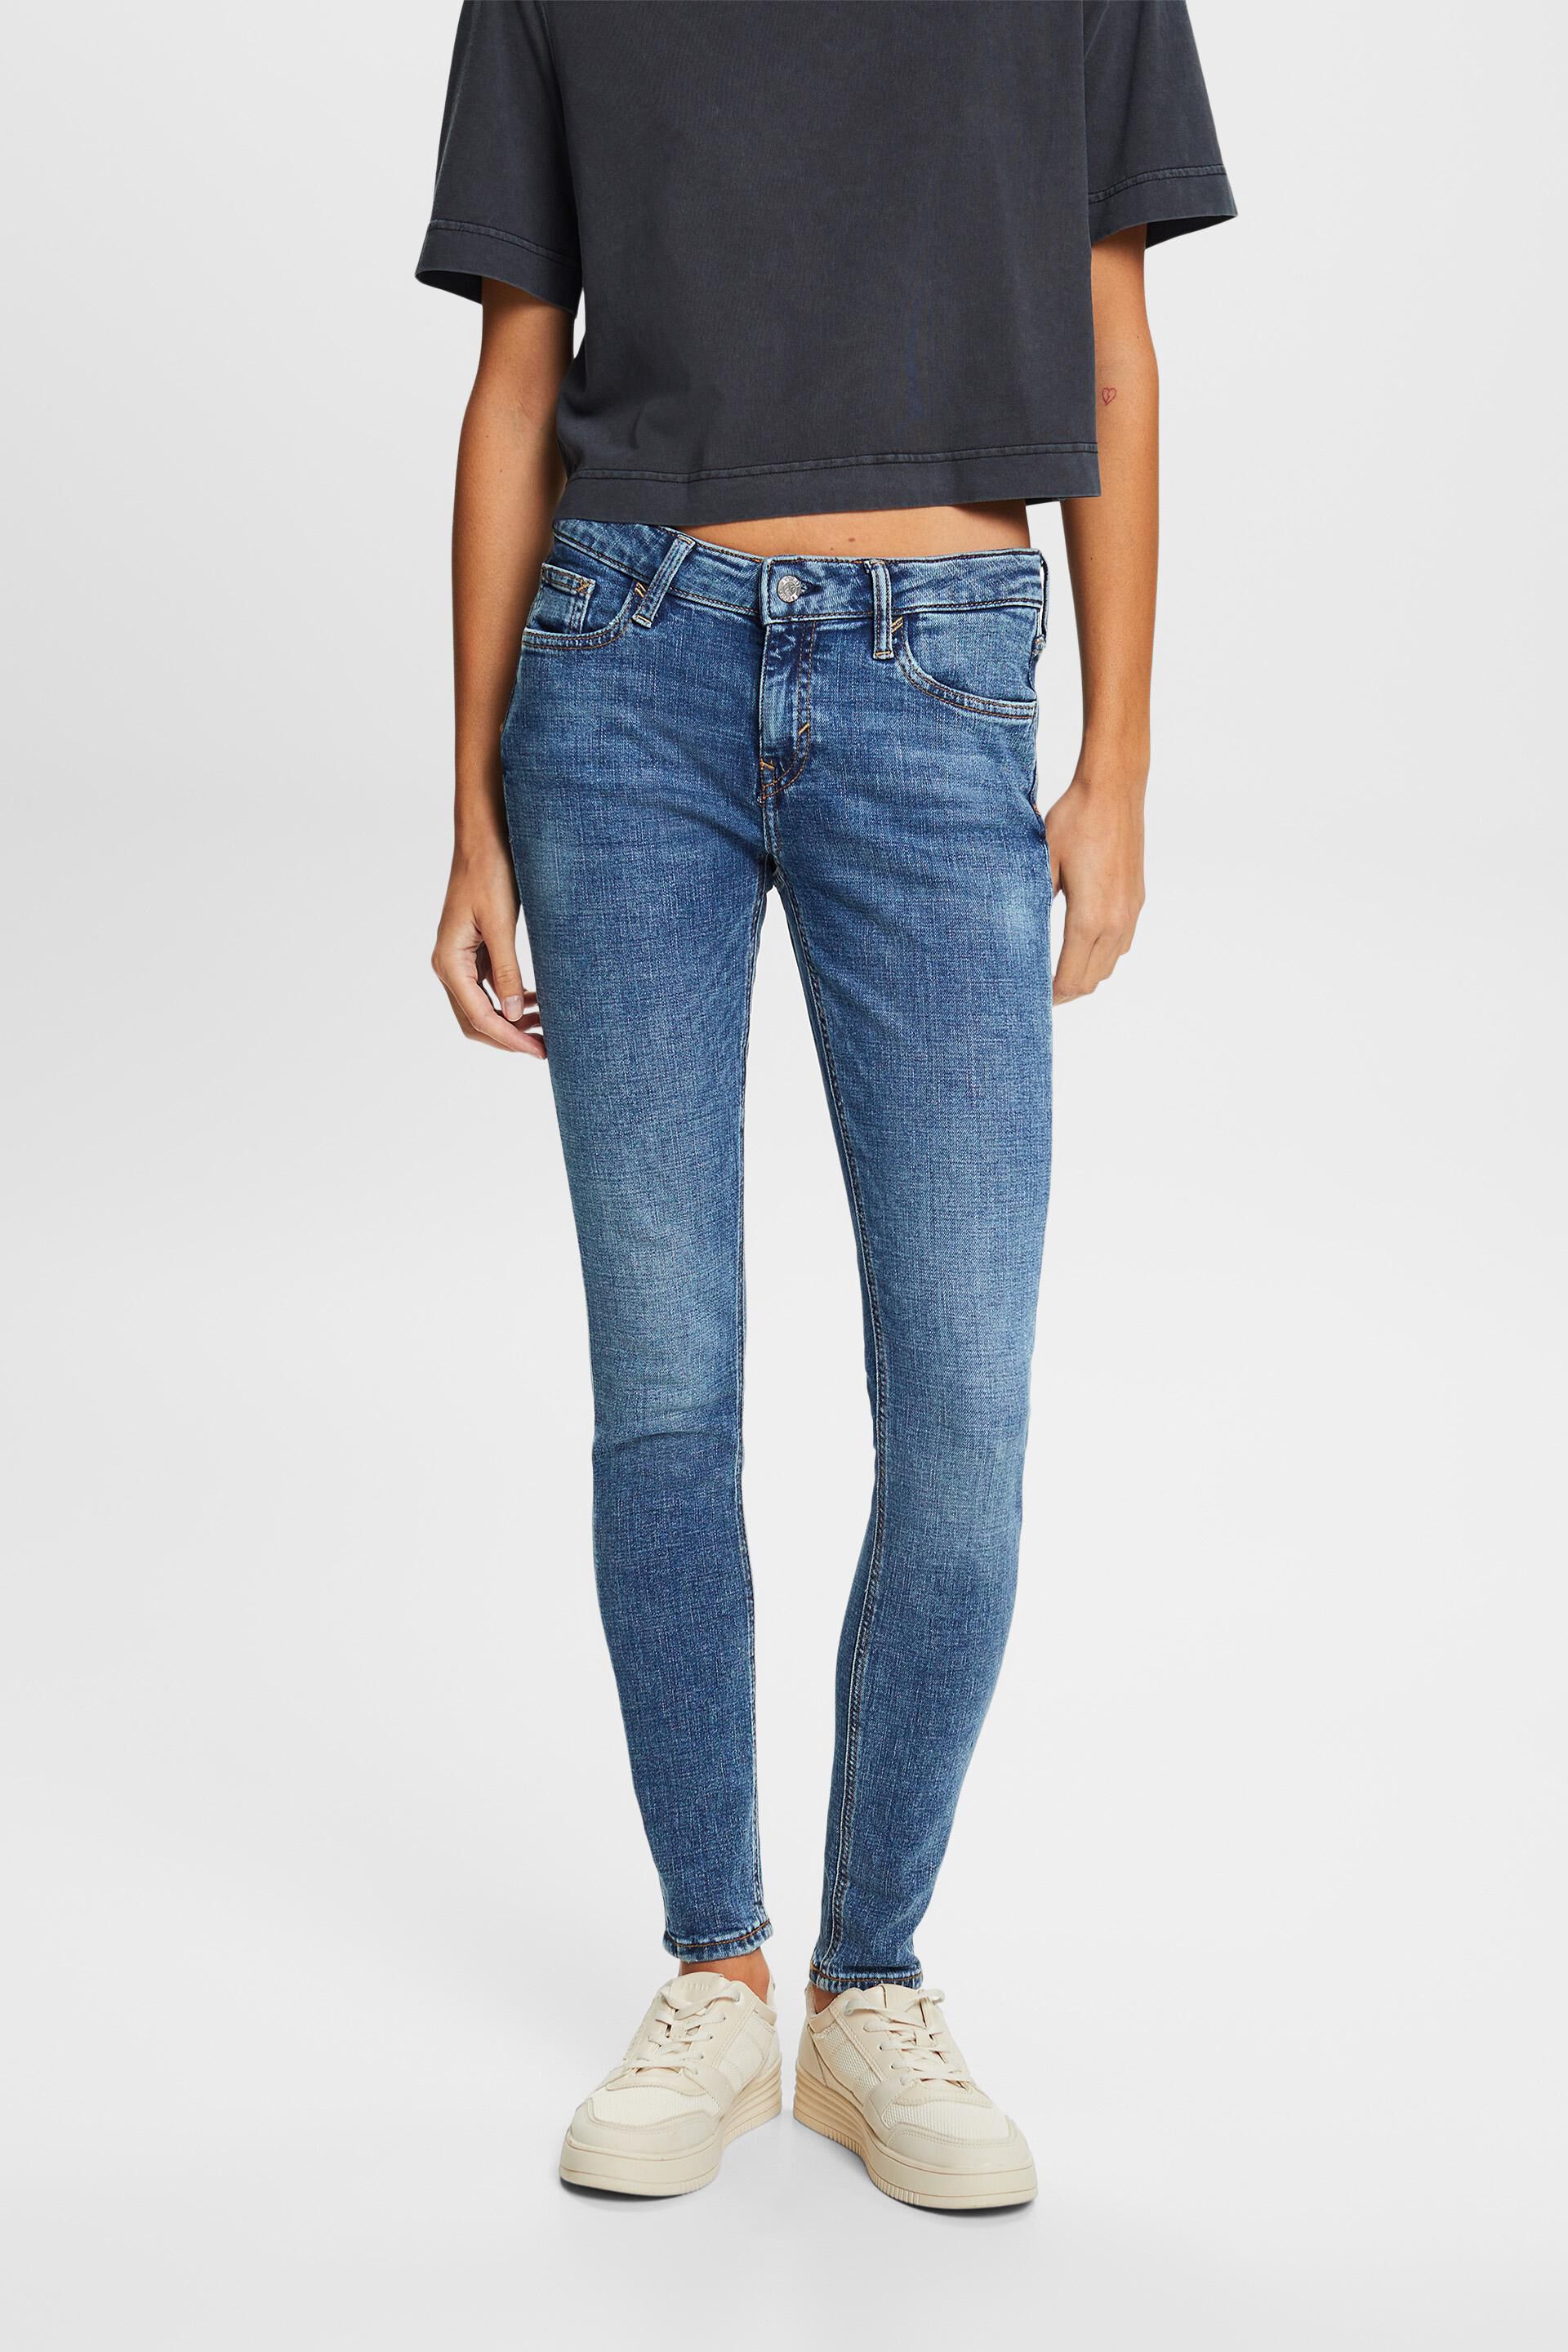 Esprit jeans fit stretch skinny Recycled: mid-rise